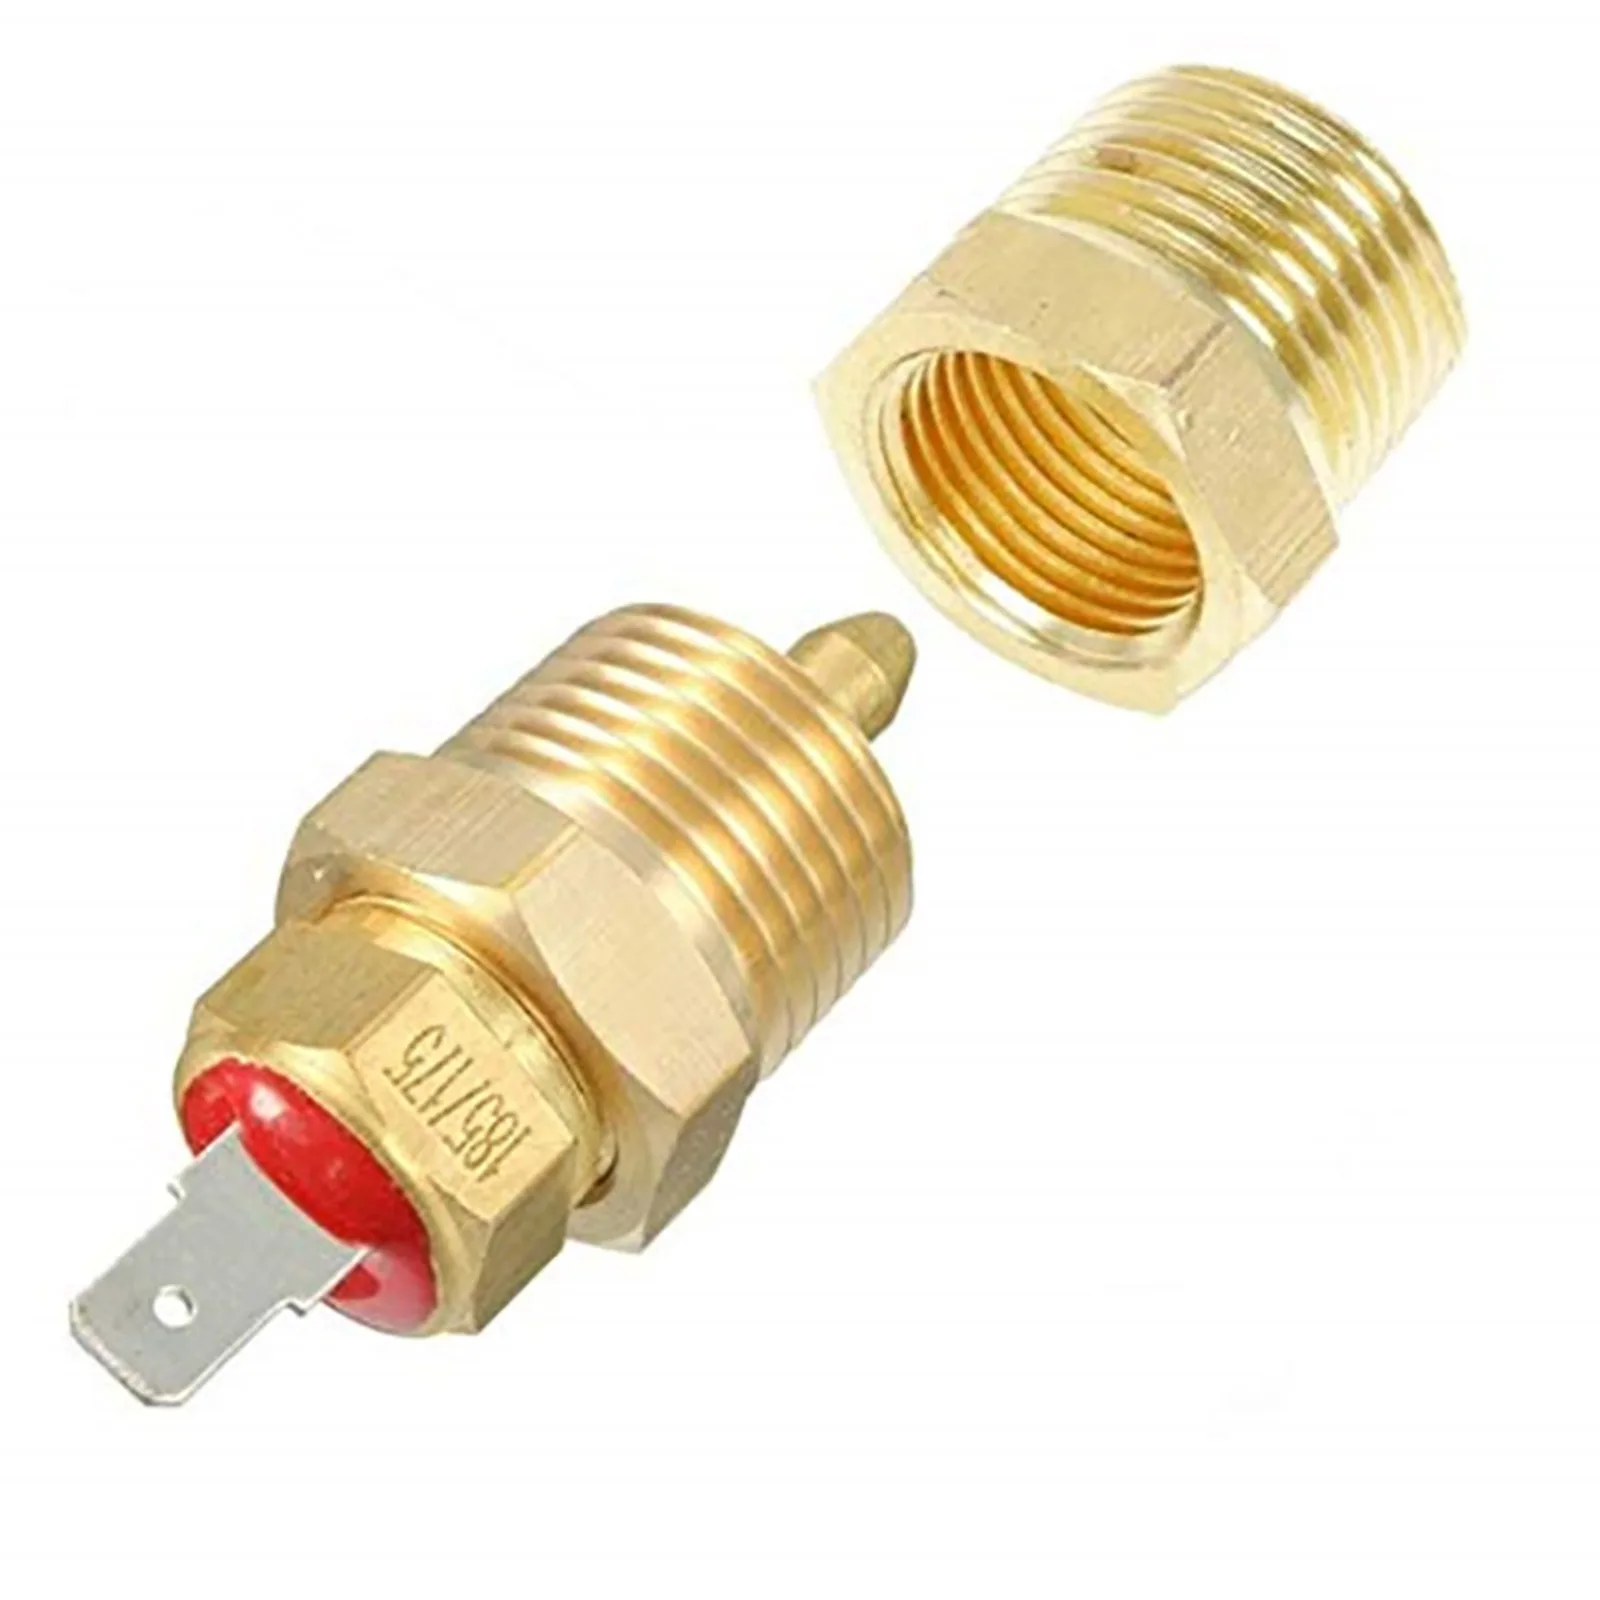 Keenso 185 to 175 Degree Gold Electric Engine Cooling Fan Thermostat Temperature Sensor Switch with 3/8 Pipe Thread for 10 12 14 16 Fan Fan Thermostat Temperature Switch 